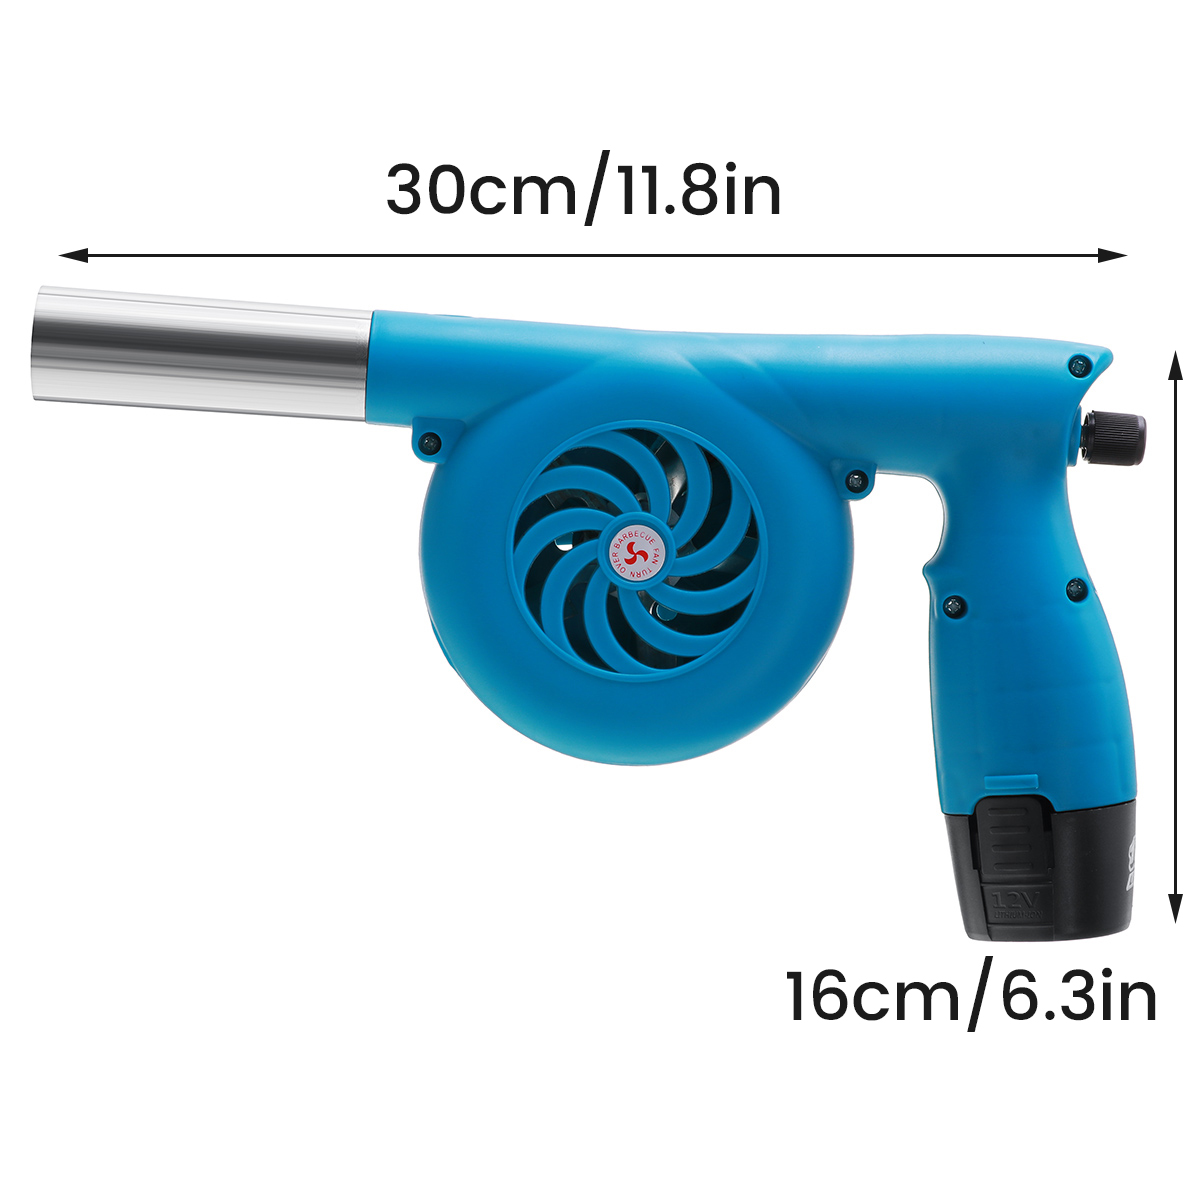 12V-Outdoor-Cooking-Electric-BBQ-Fan-Air-Blower-Rechargeable-BBQ-Grill-Fan-Guns-Portable-Fire-Campin-1861810-5